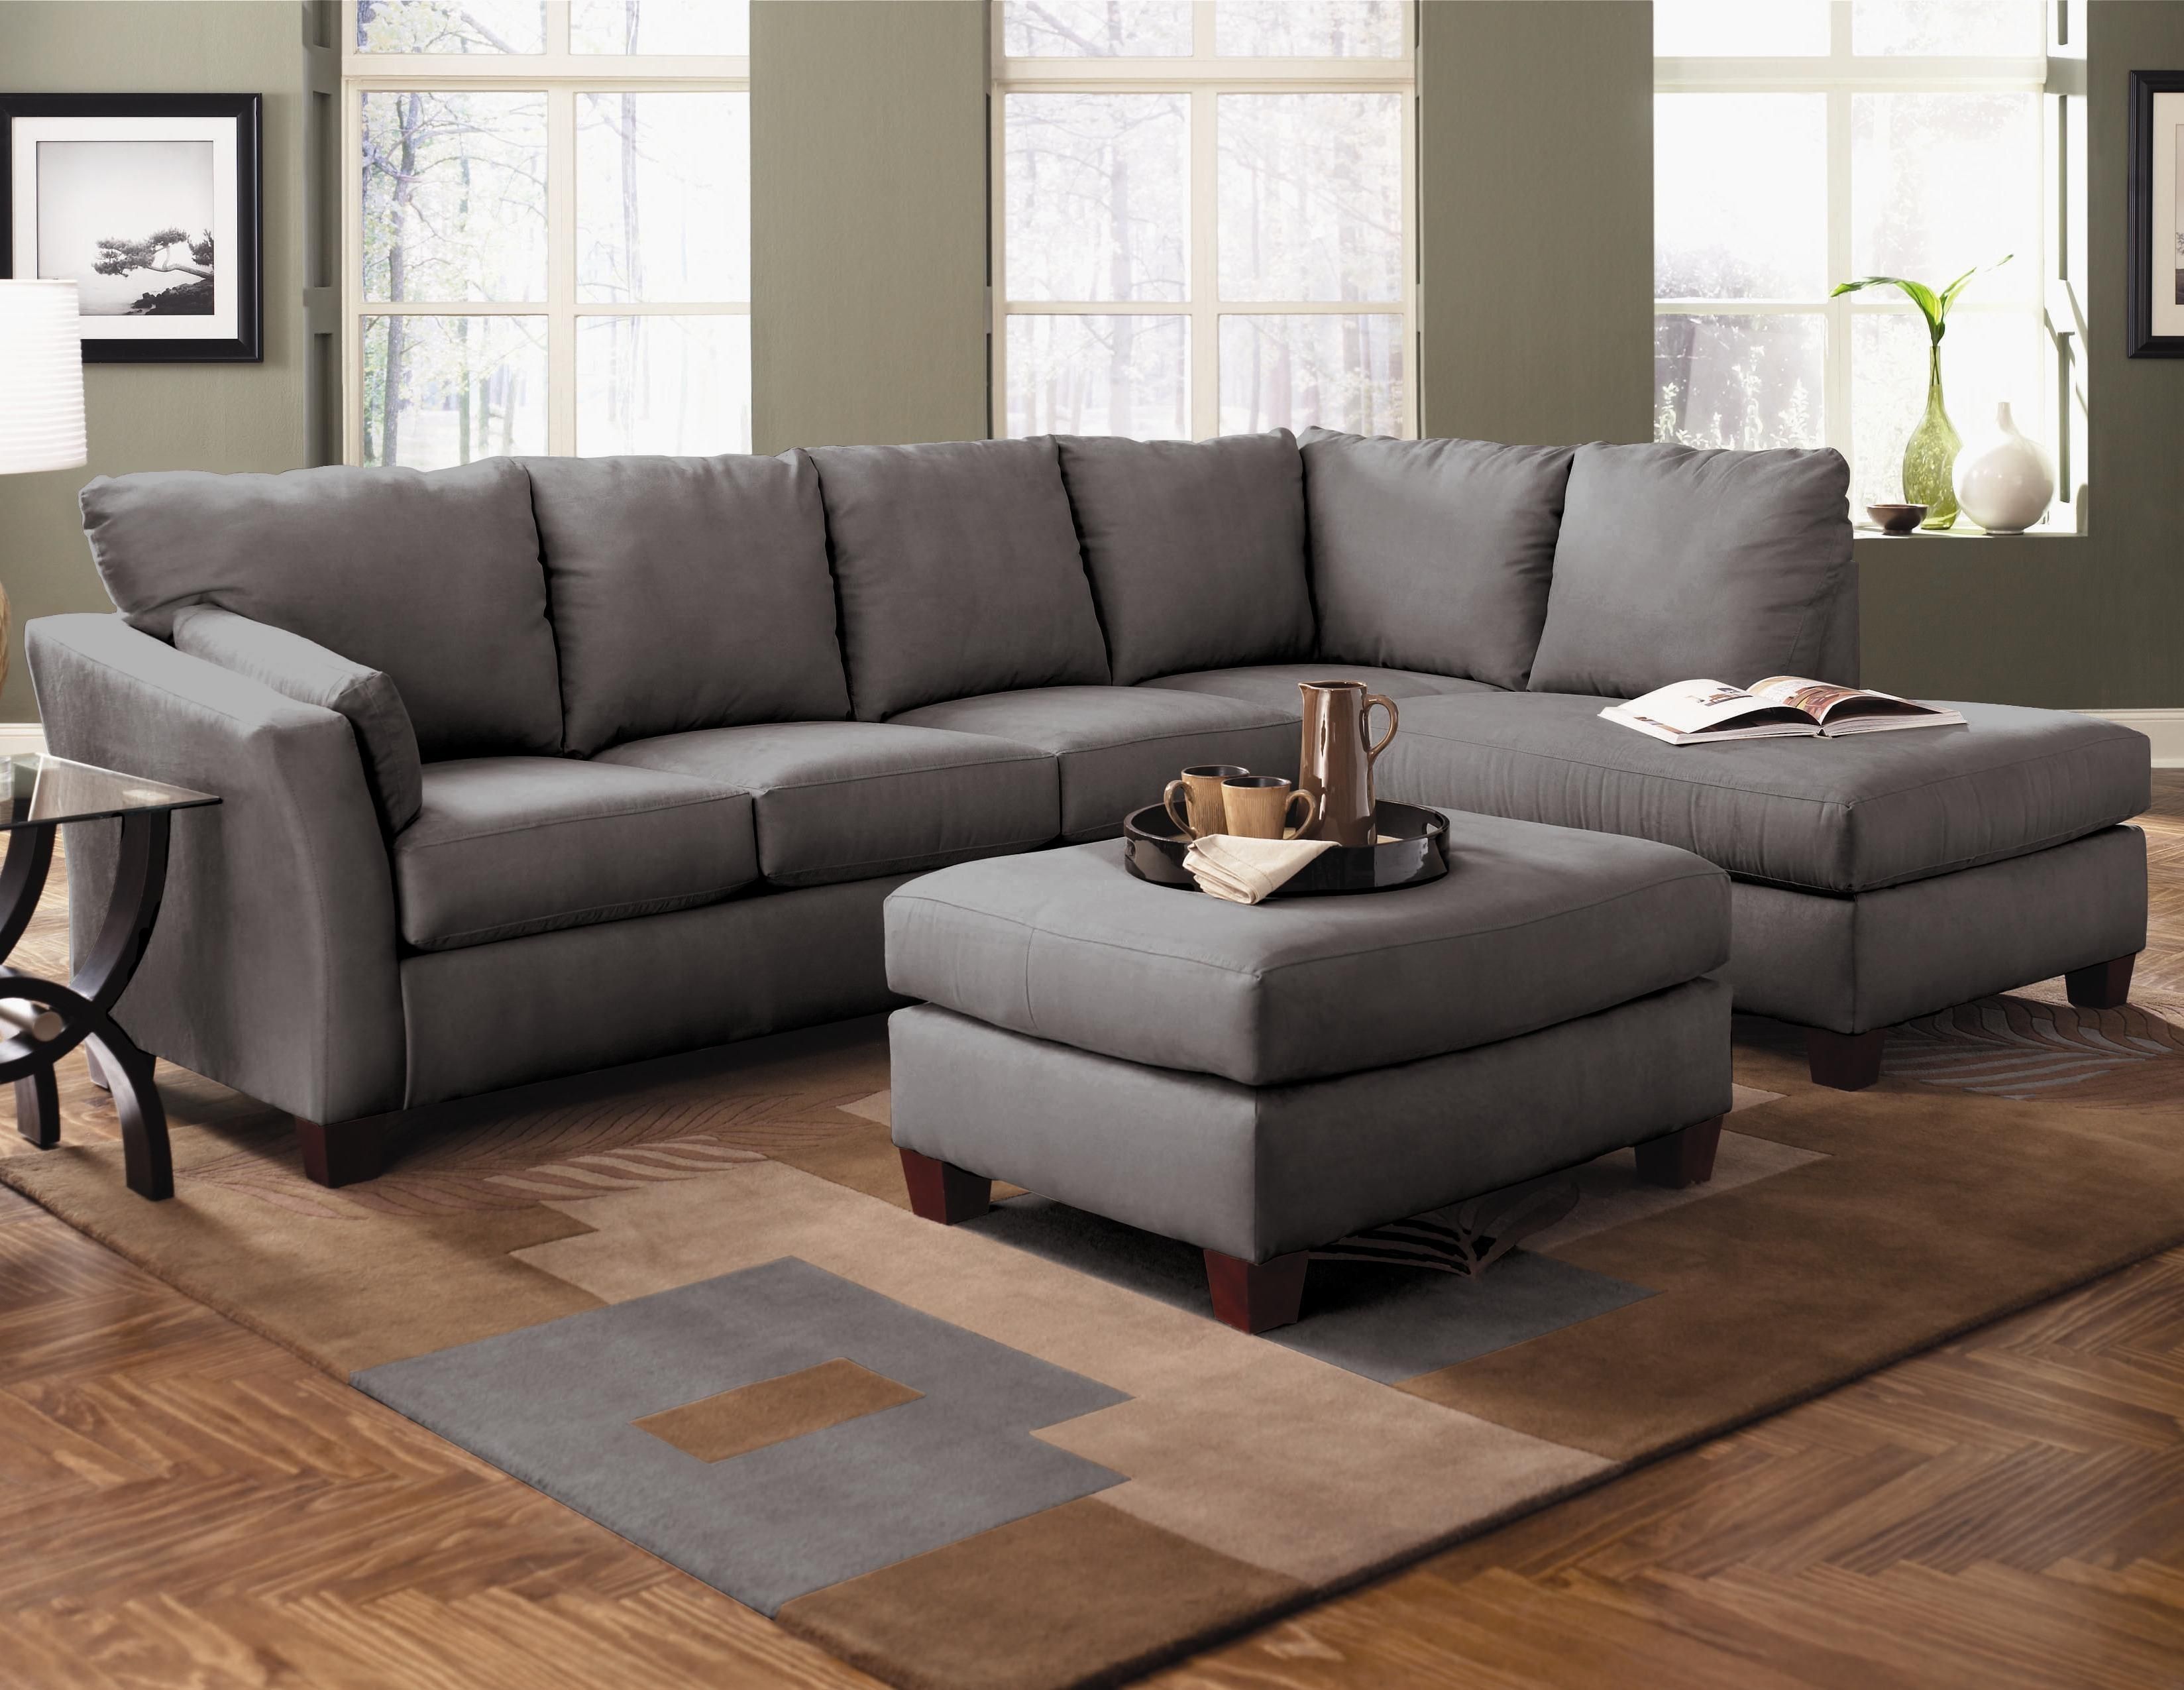 The 10 Best Collection of Johnny Janosik Sectional Sofas